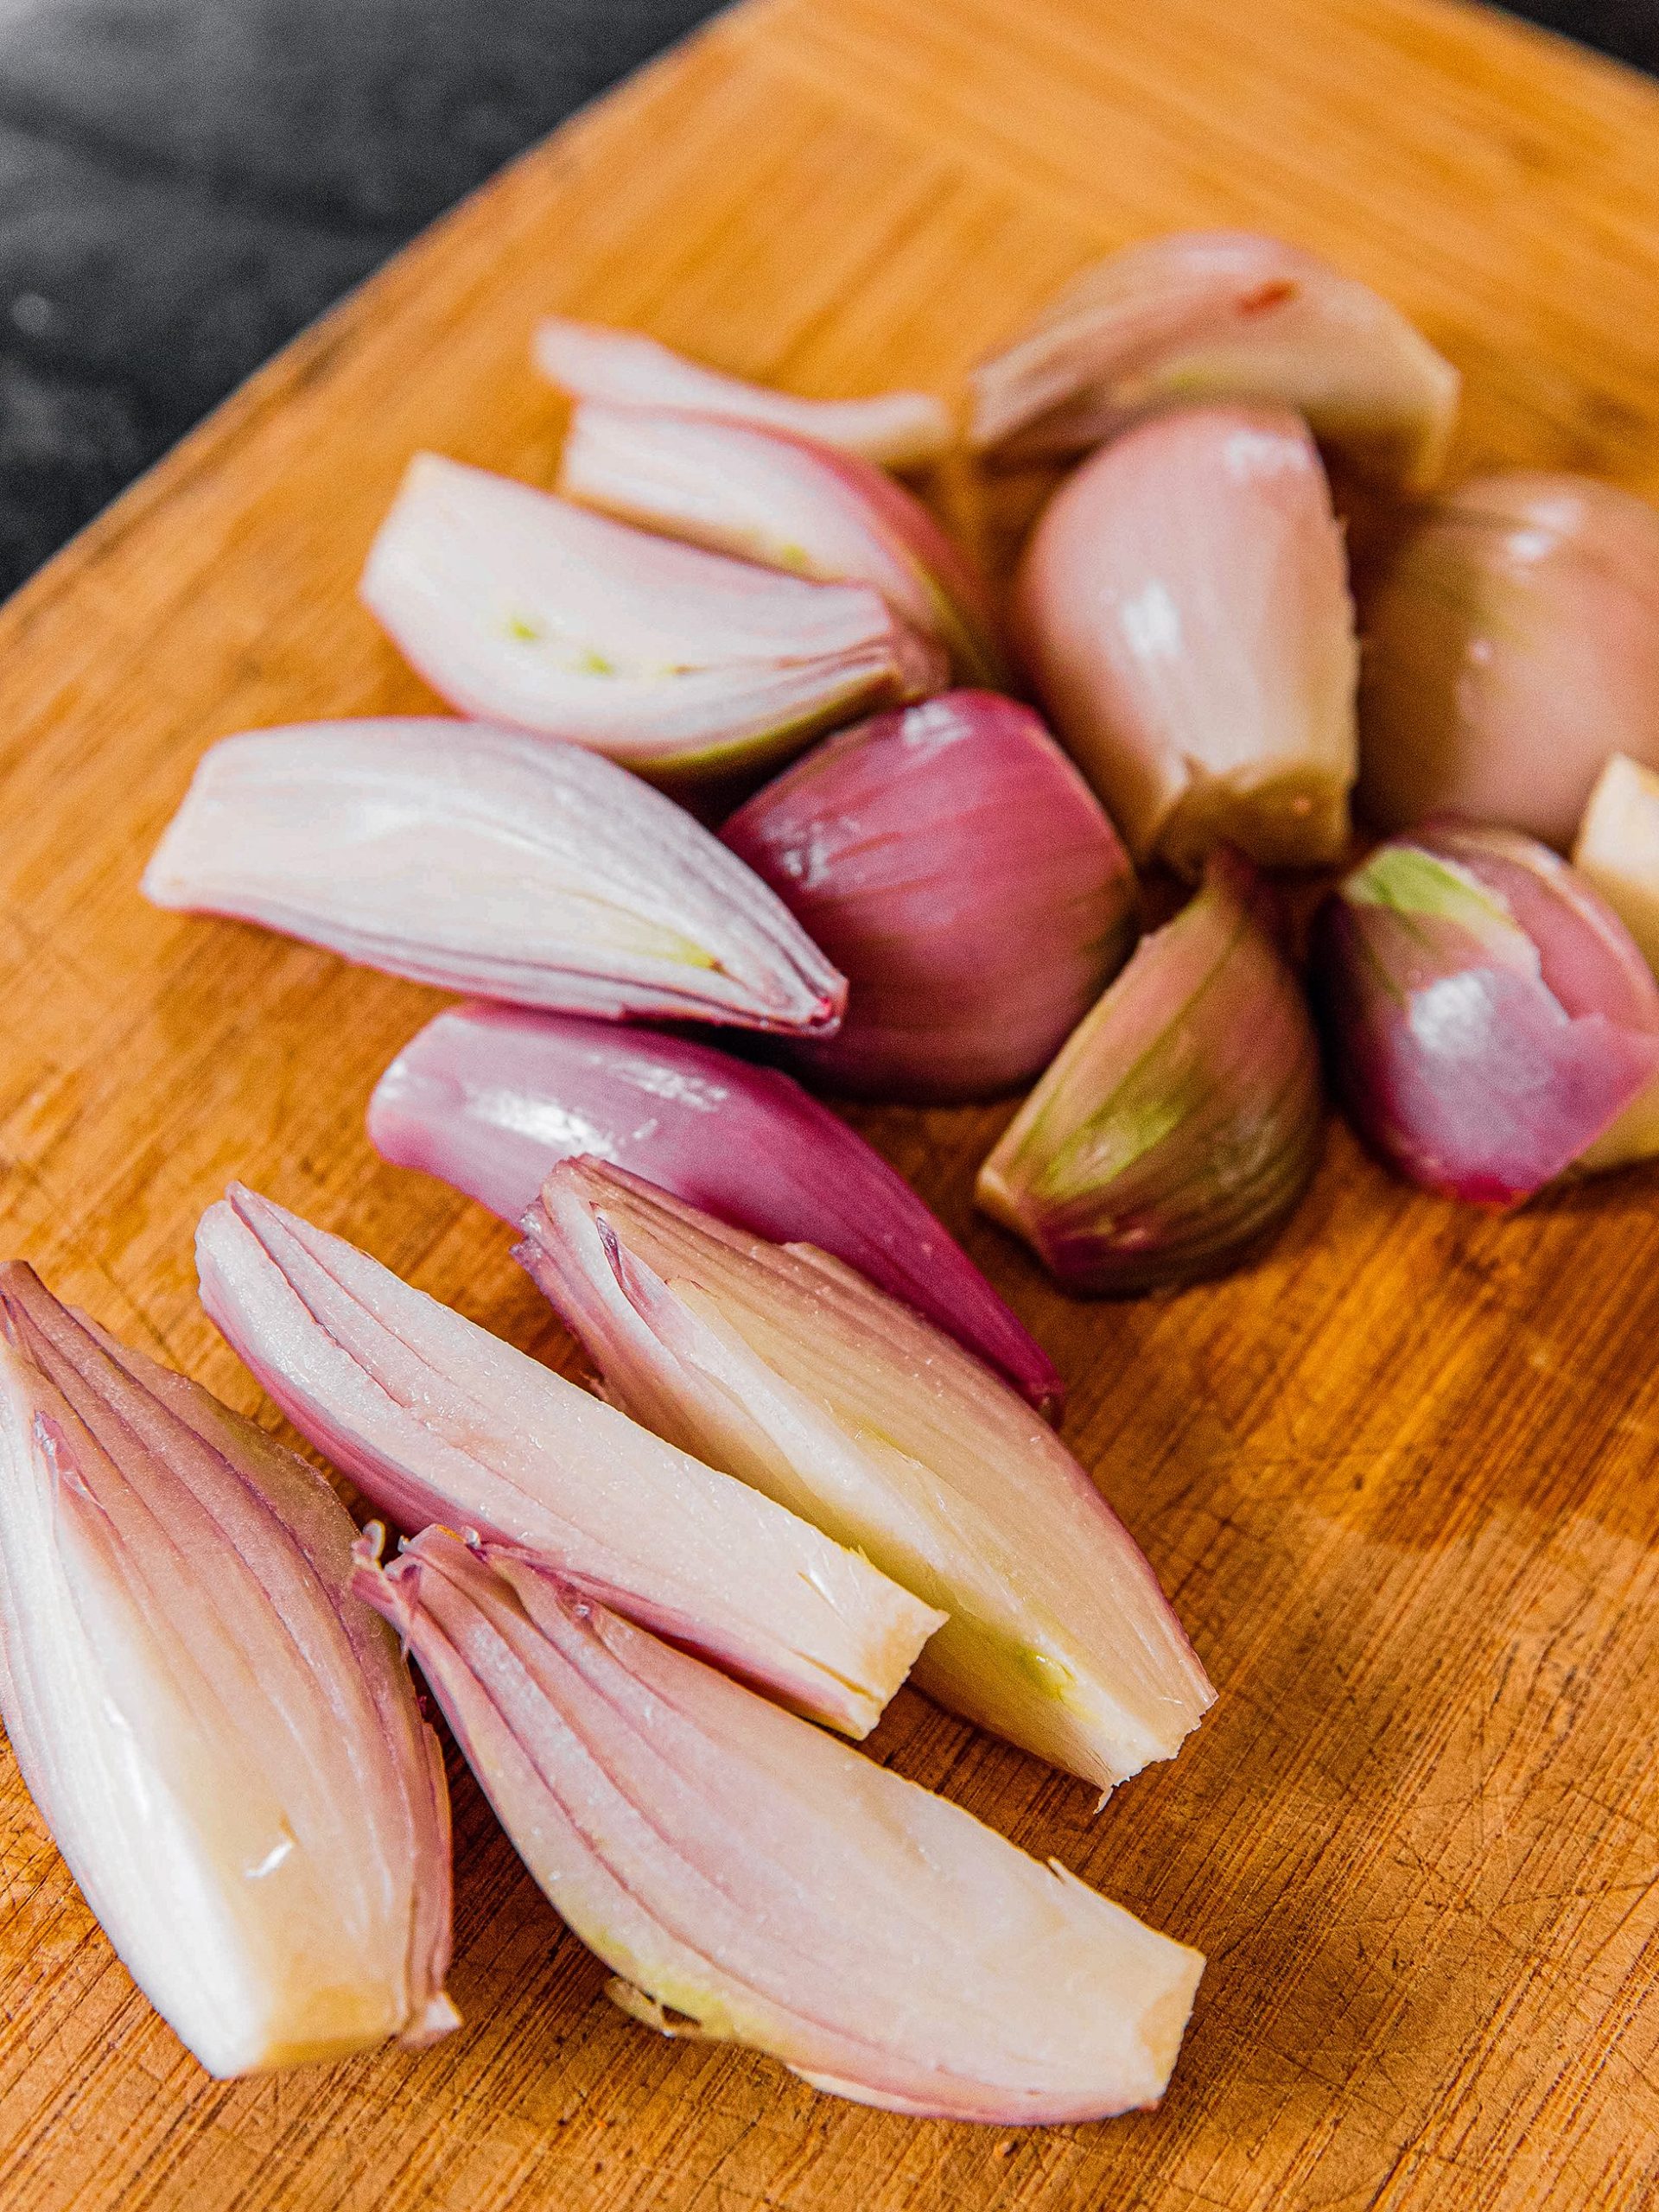 Bring a saucepan full of water to boil. Add pearl onions and cook for 3 minutes